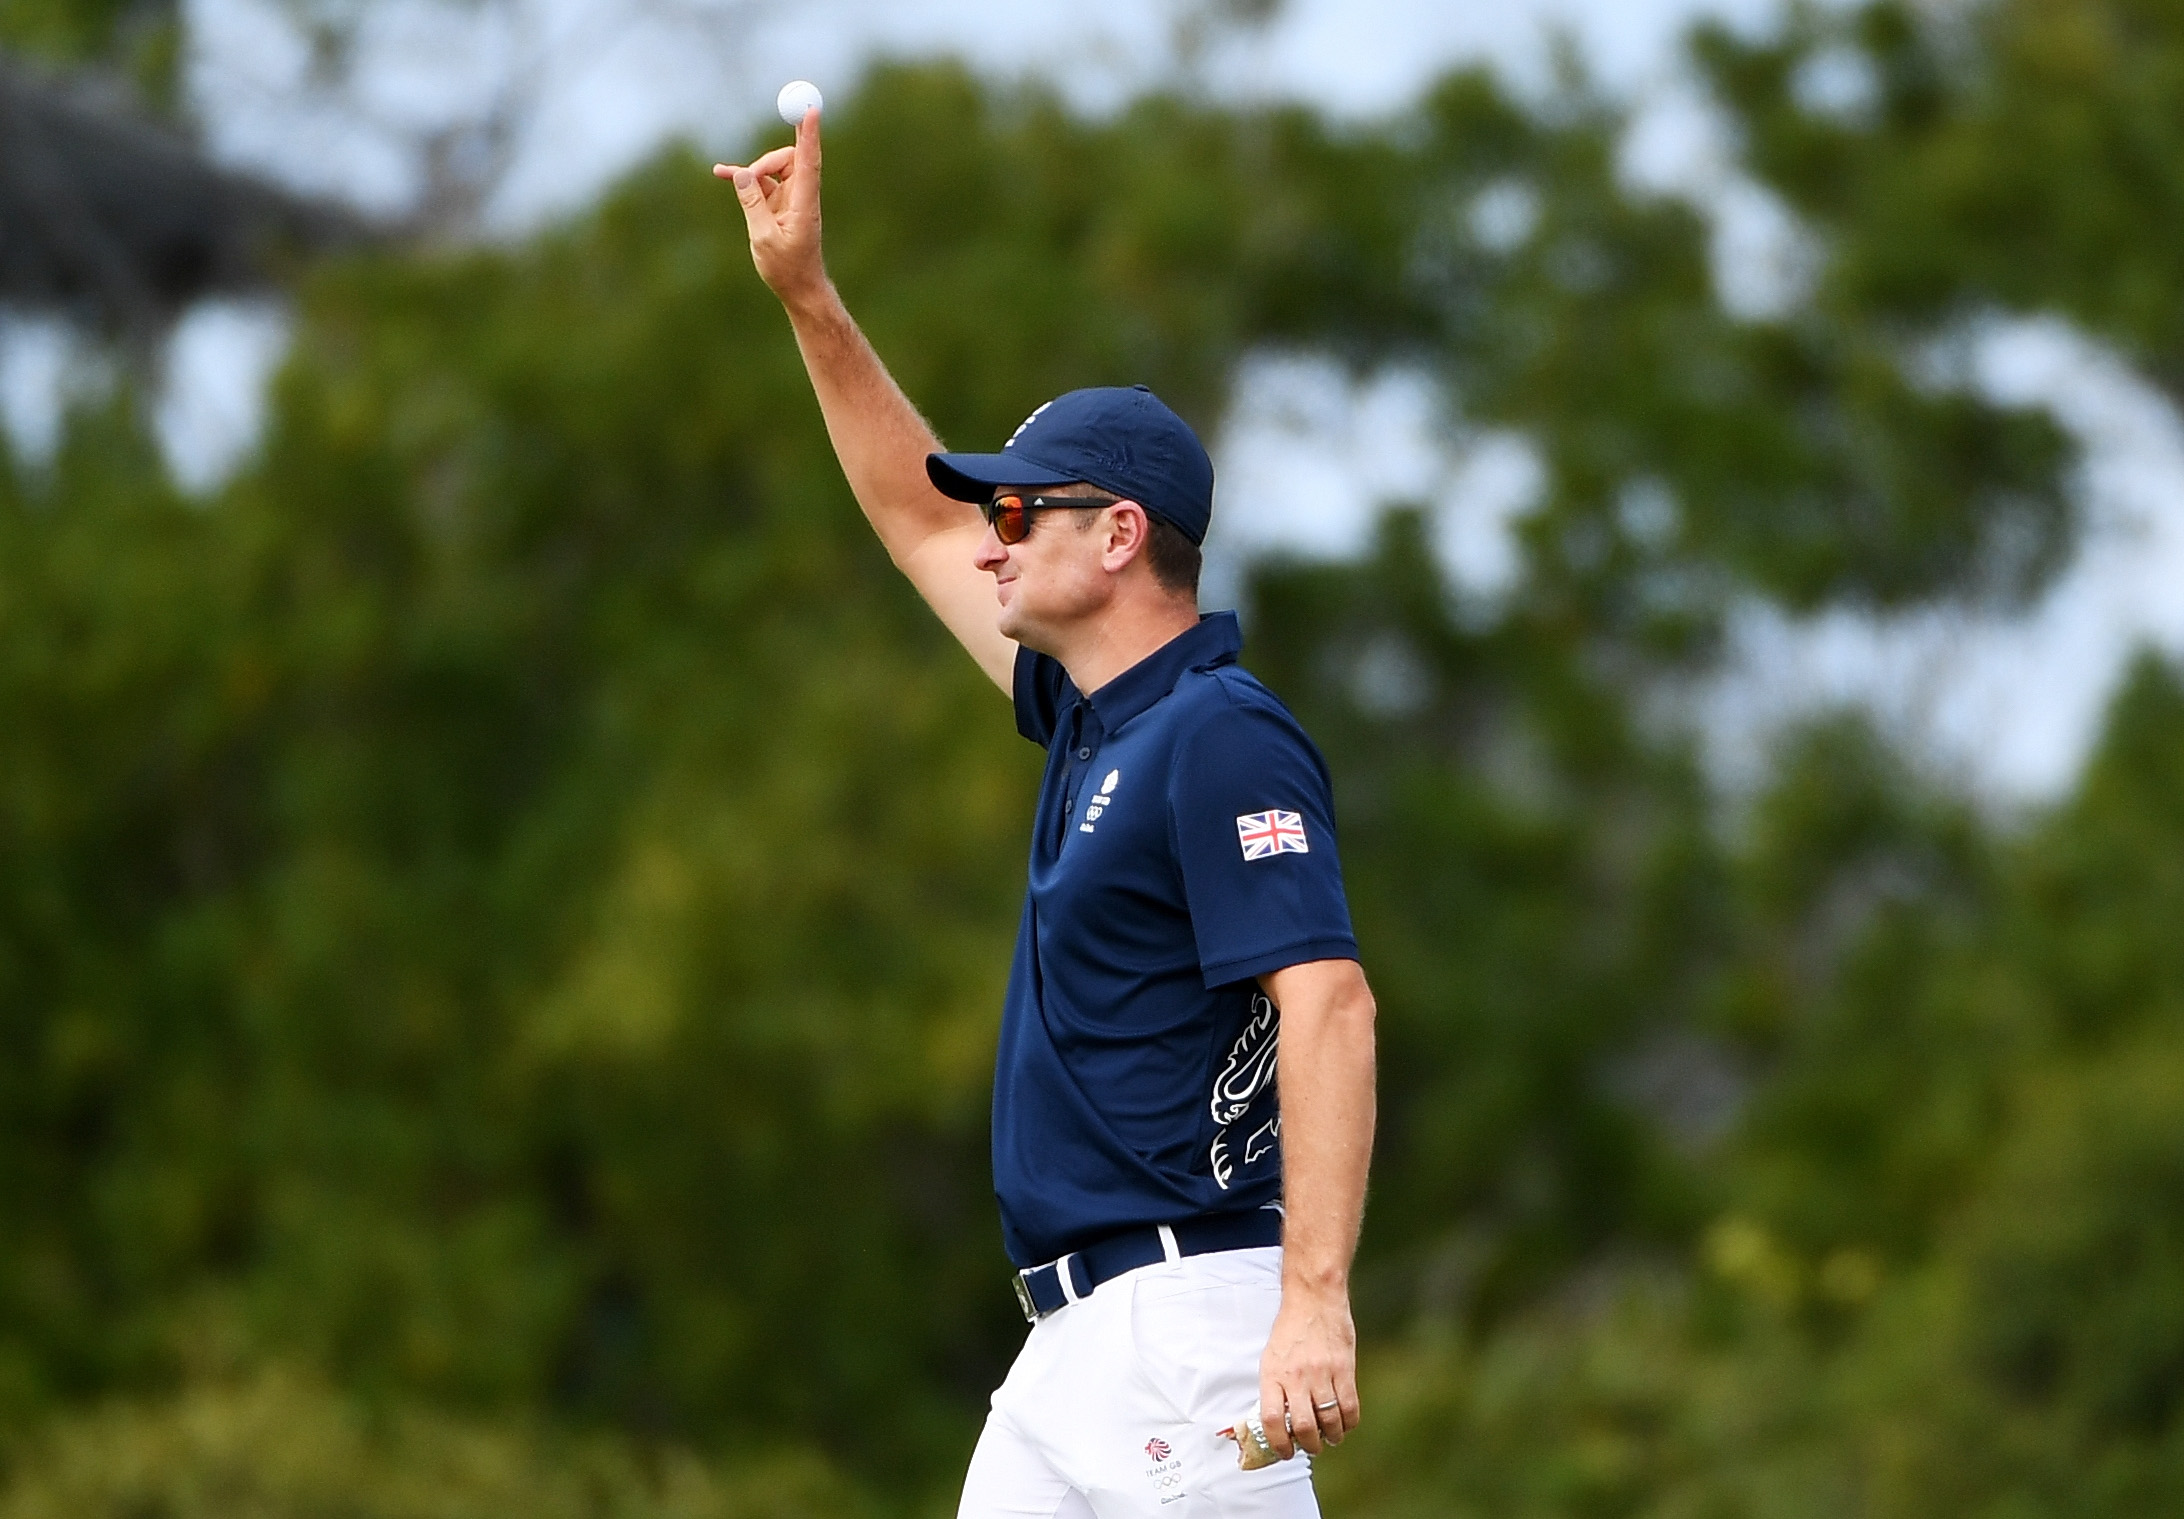 Justin Rose of Great Britain celebrates his hole in one on the fourth green during the first round of men's golf on Day 6 of the Rio 2016 Olympics at the Olympic Golf Course on August 12, 2016 in Rio de Janeiro, Brazil. (Ross Kinnaird—;Getty Images)